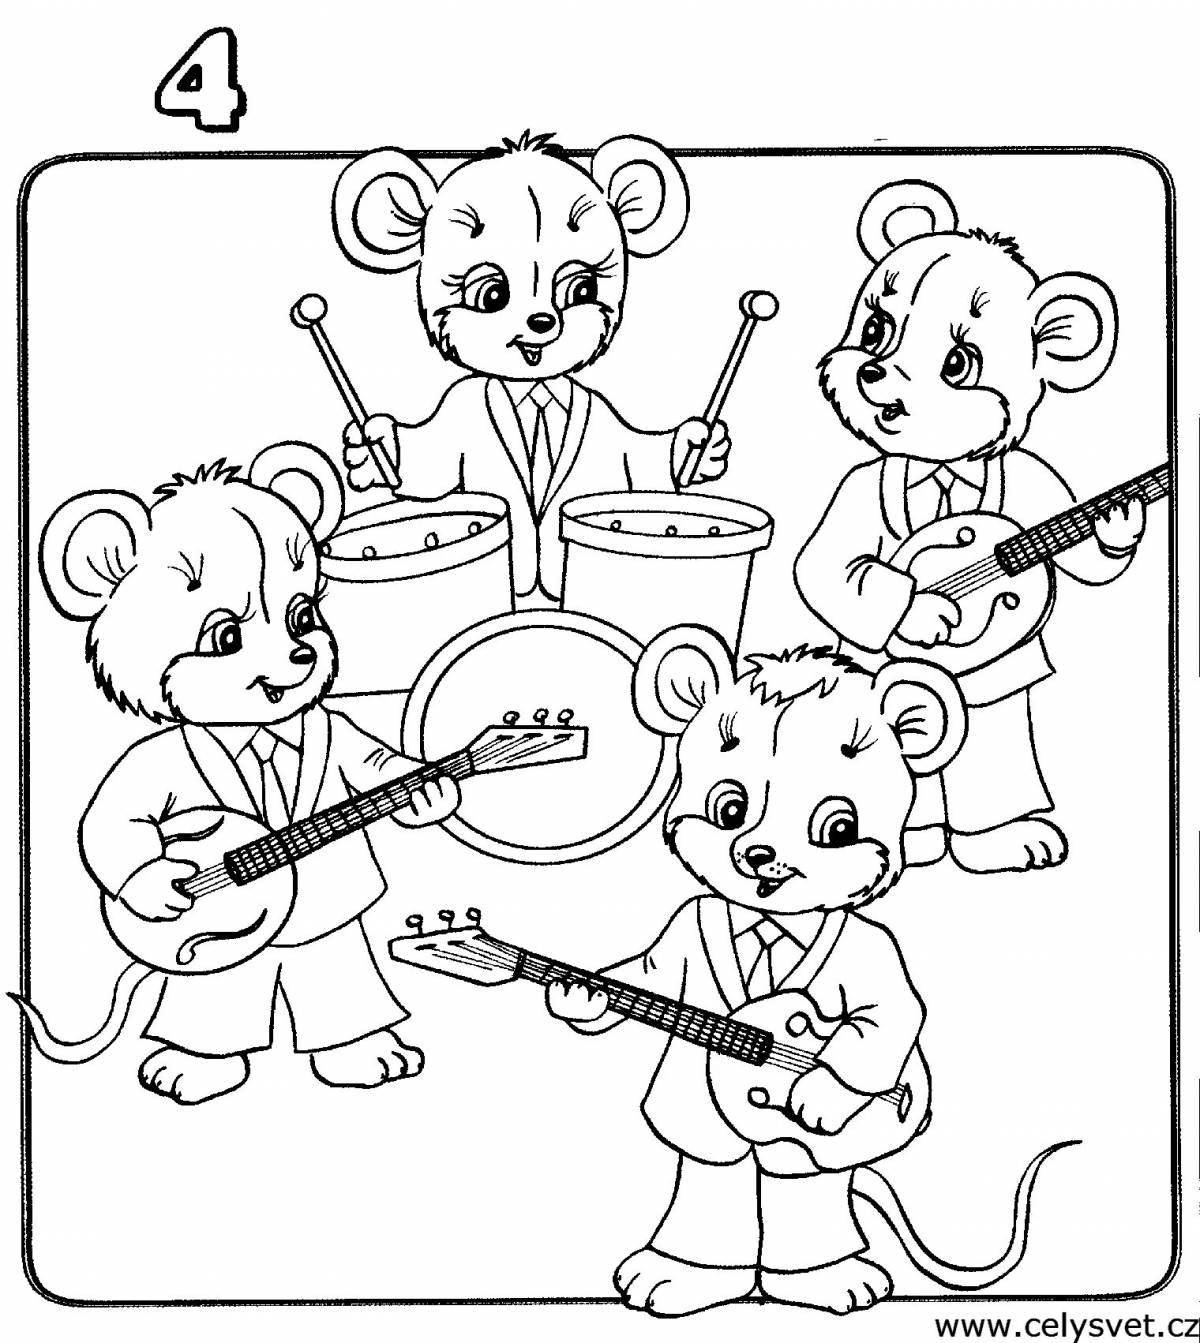 Glorious orchestra coloring page for kids